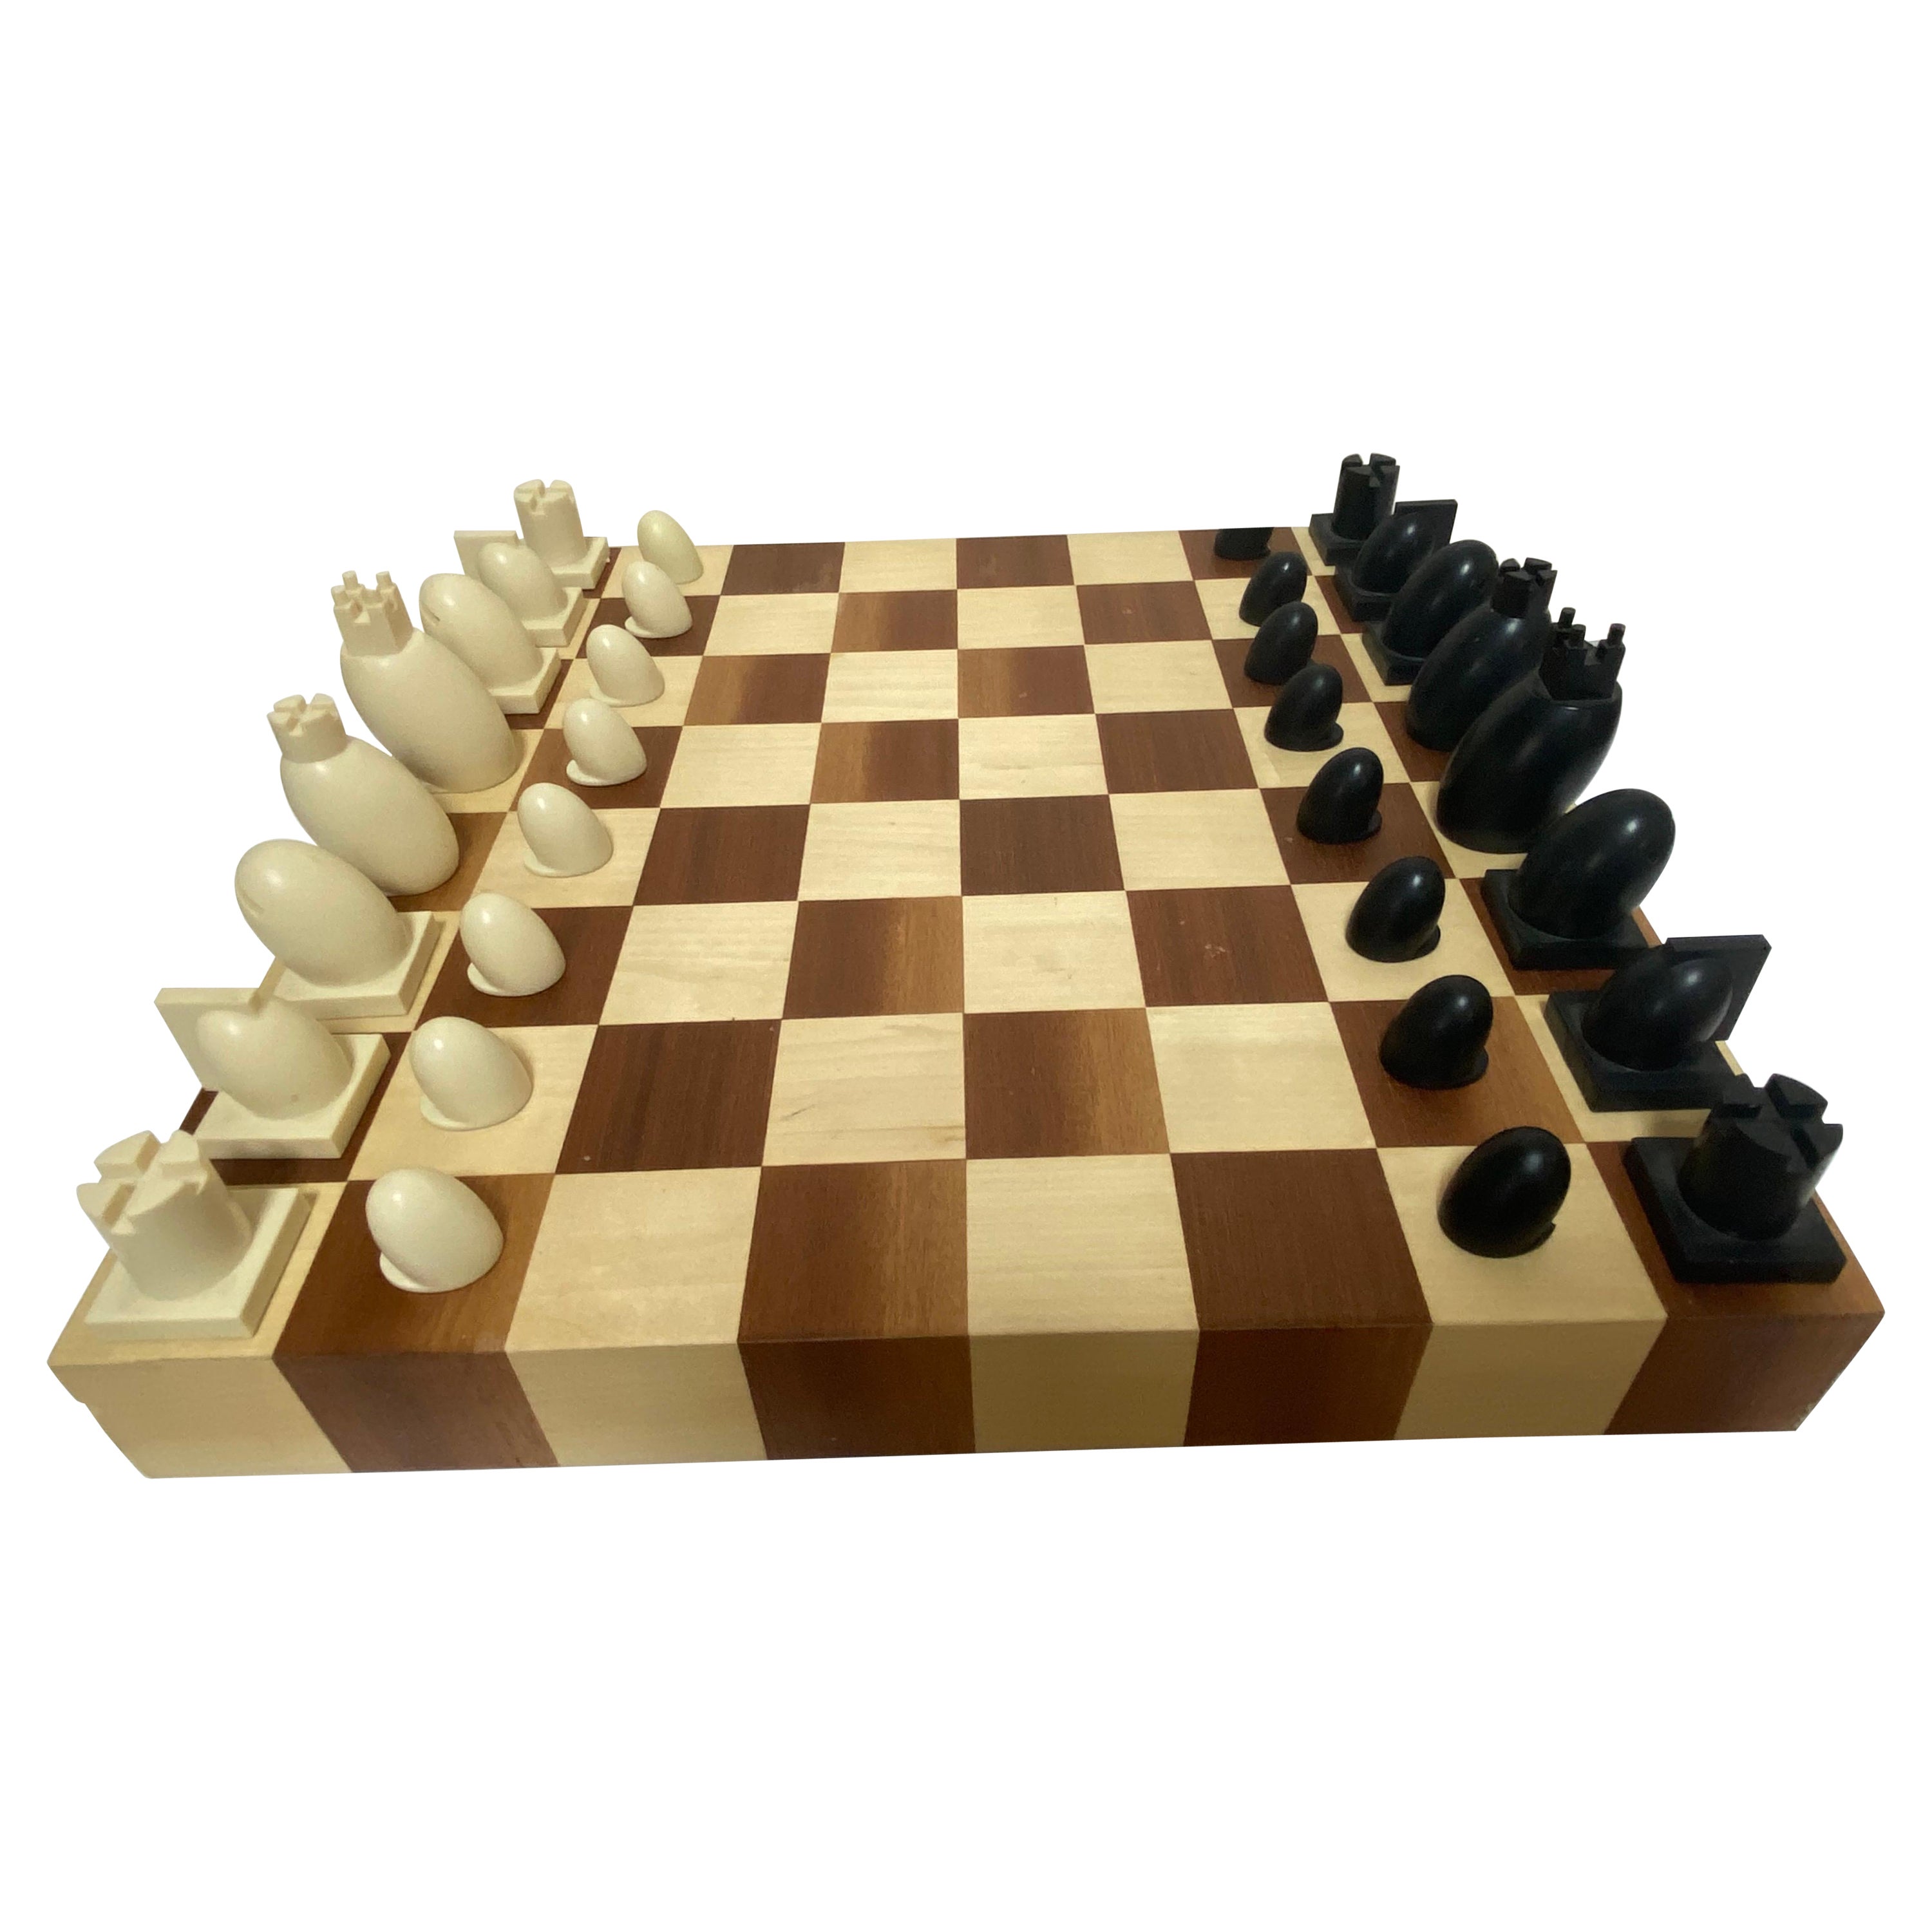 NEW Michael Graves Design Travel Size Chess and Checkers Nice Gift! 